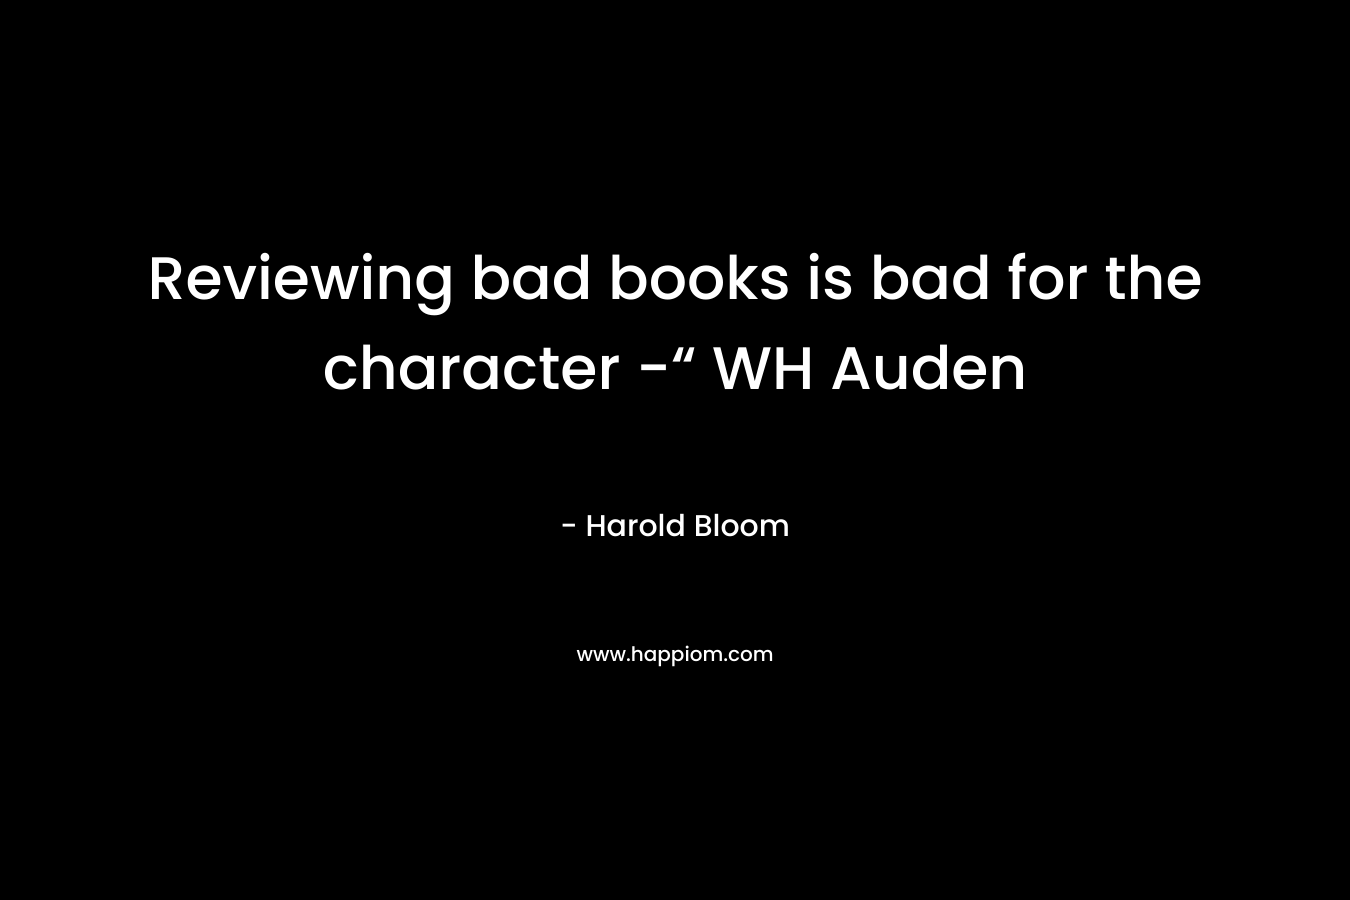 Reviewing bad books is bad for the character -“ WH Auden